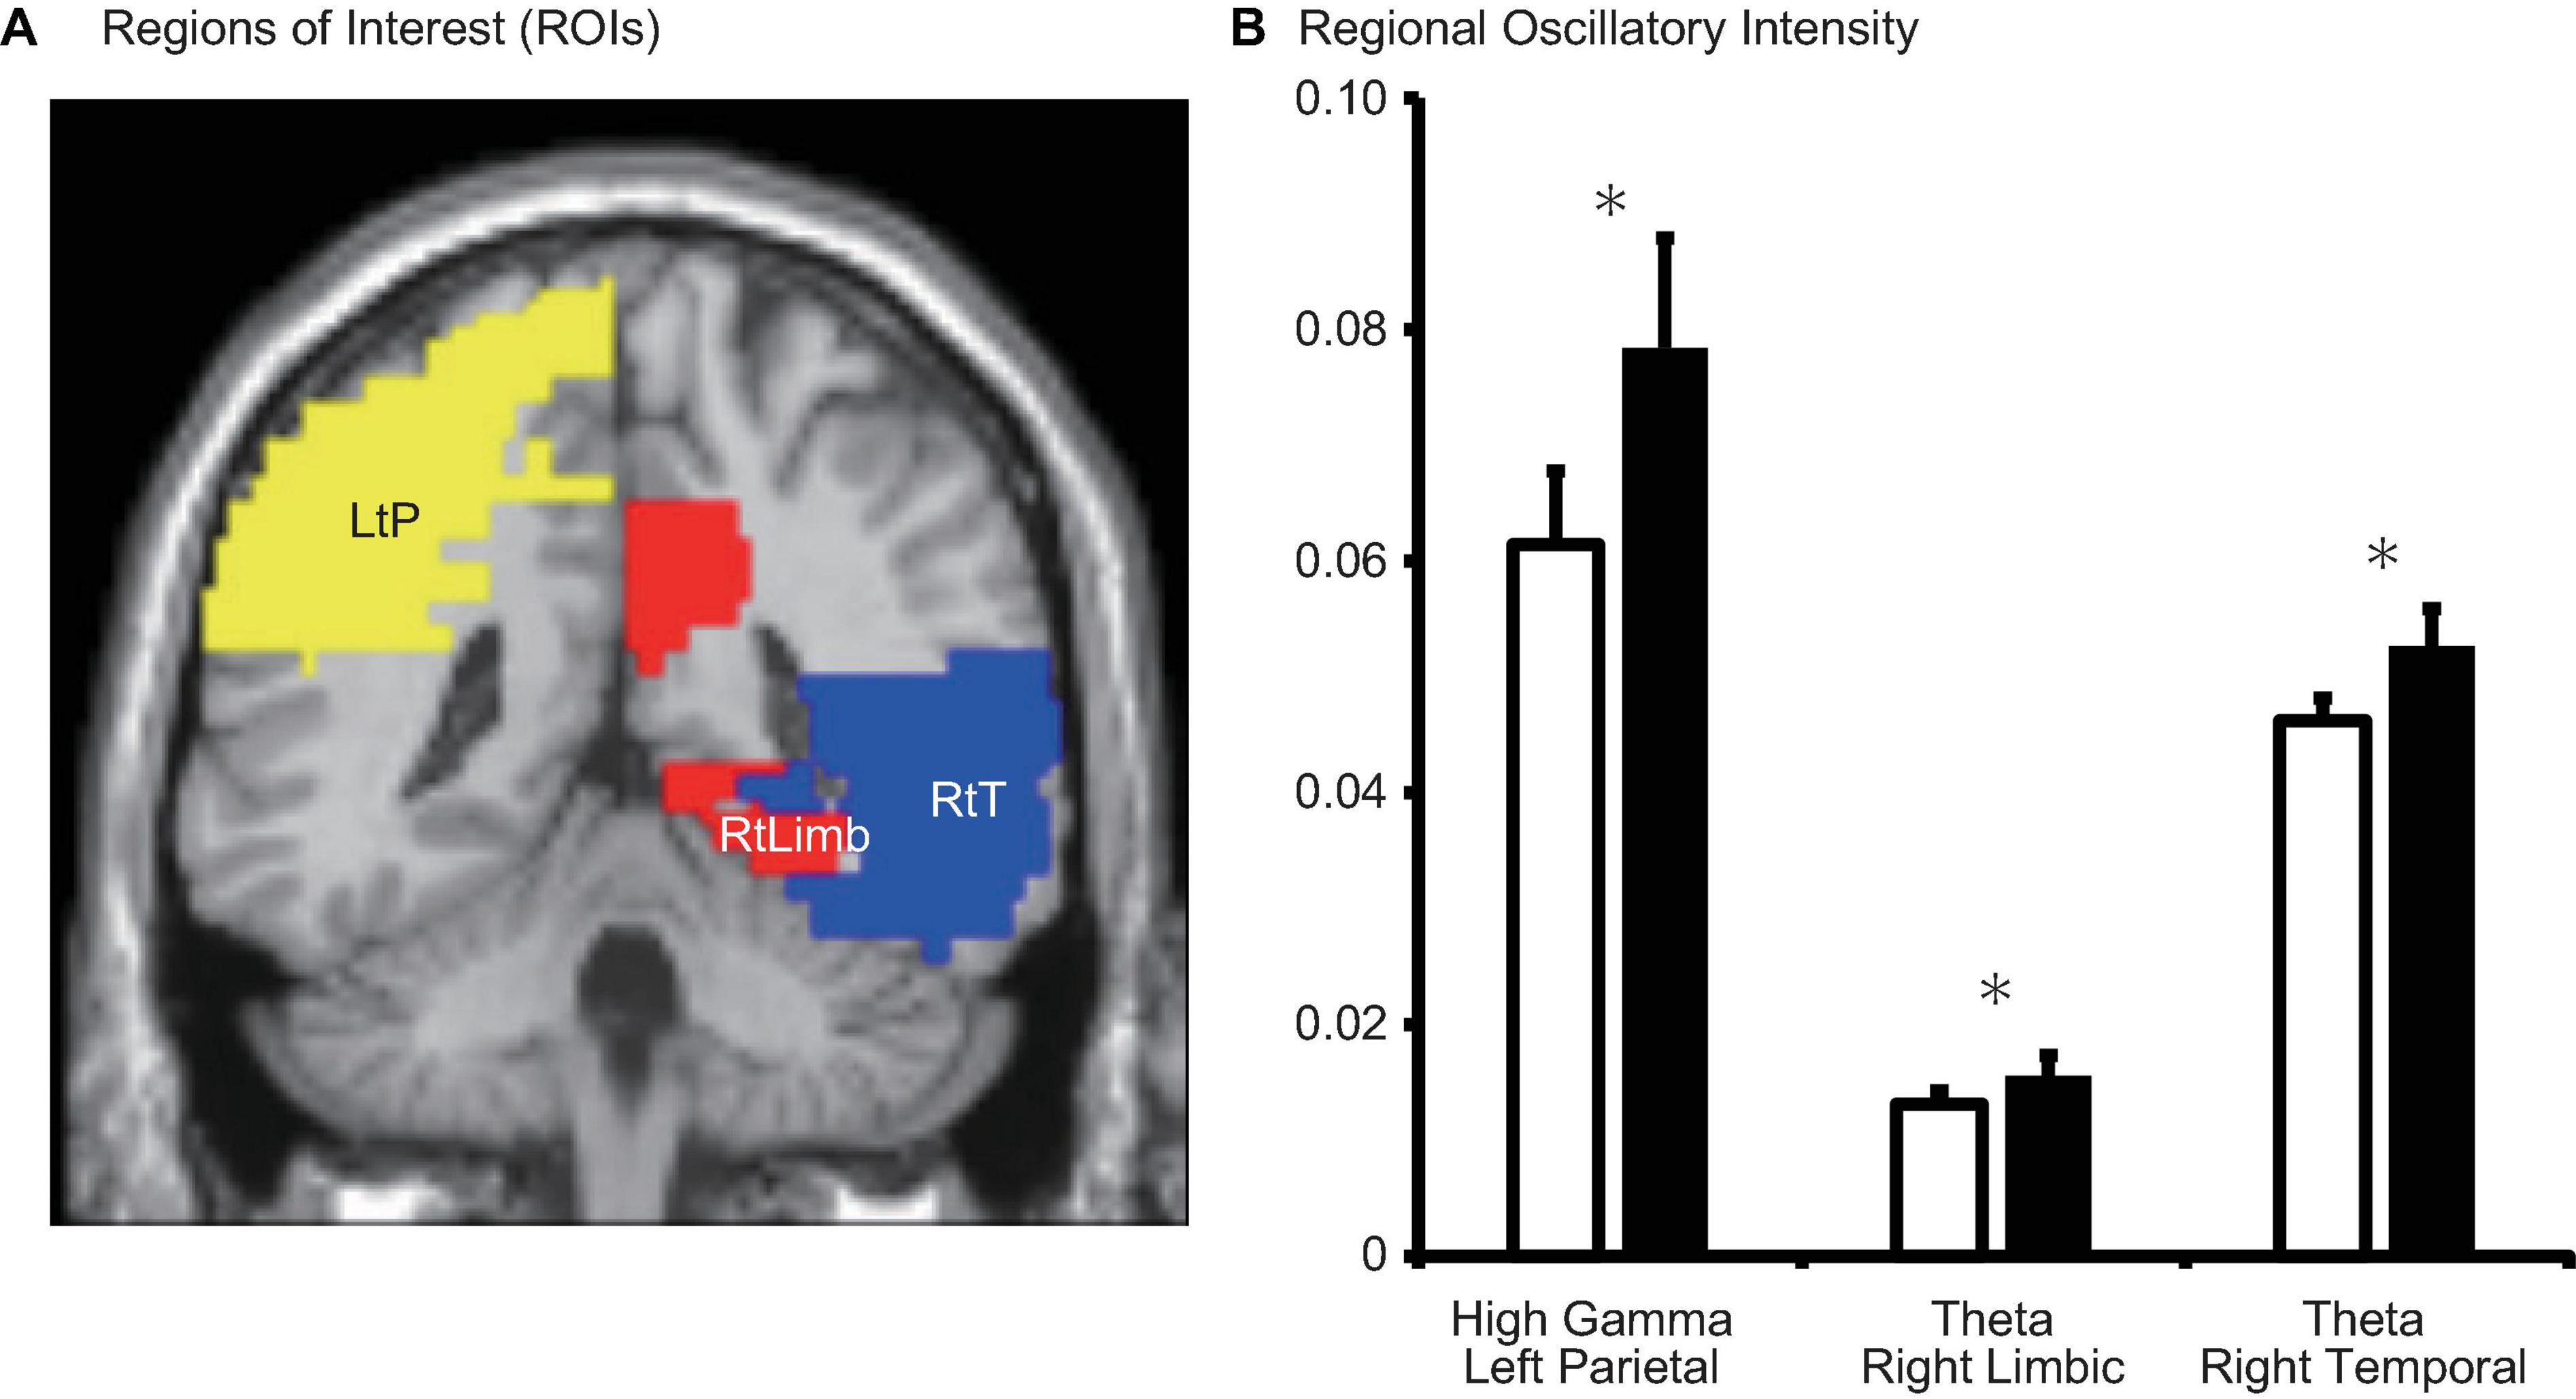 Human menstrual cycle variation in subcortical functional brain  connectivity: a multimodal analysis approach